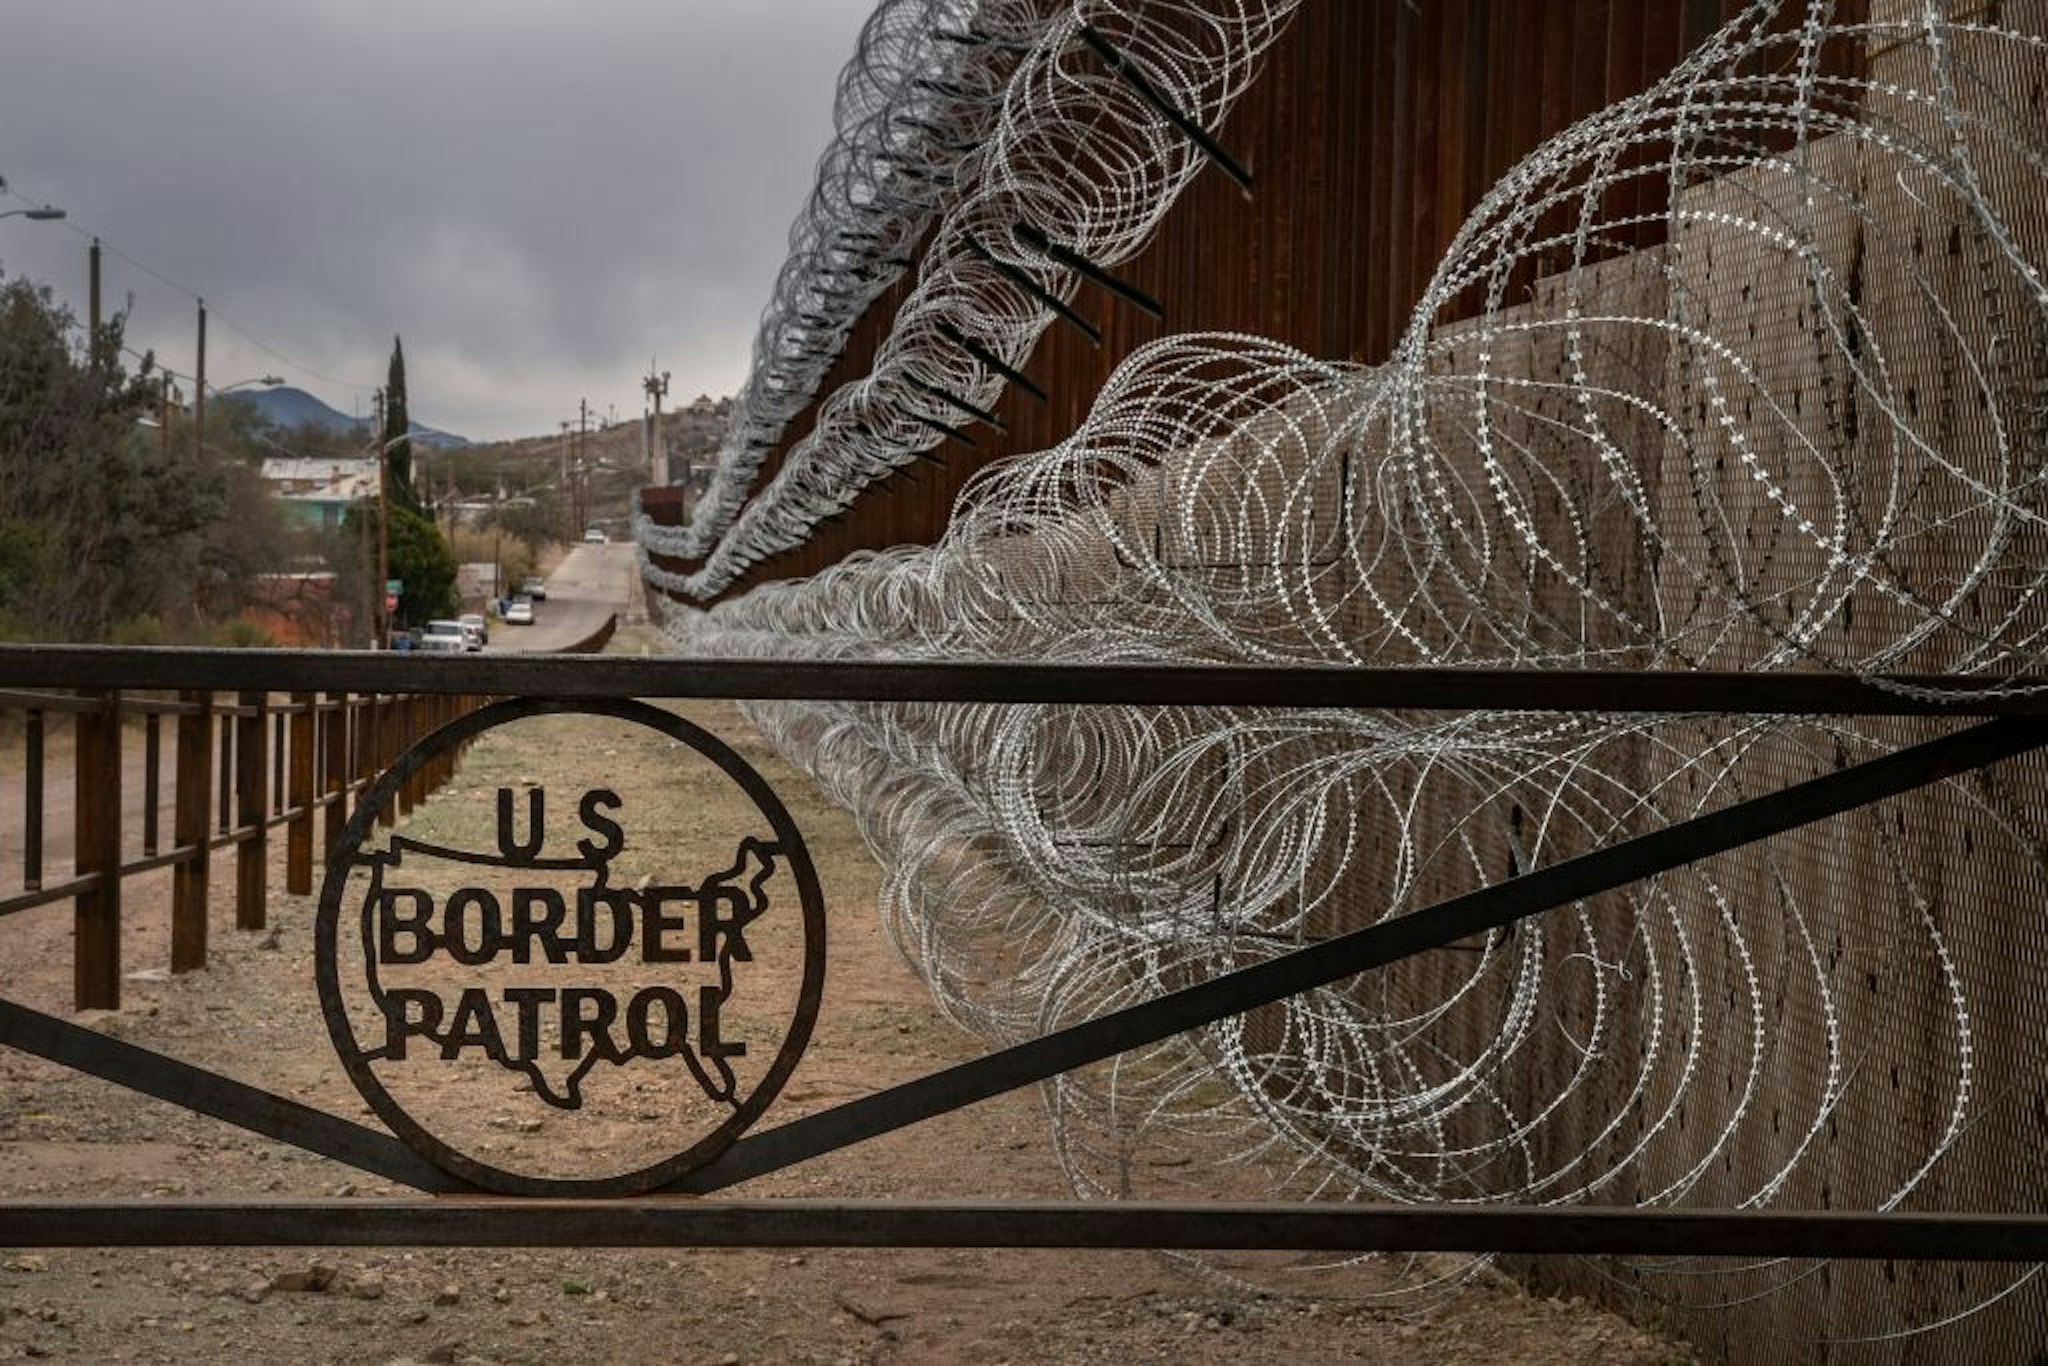 TOPSHOT - A metal fence marked with the US Border Patrol sign prevents people to get close to the barbed/concertina wire covering the US/Mexico border fence, in Nogales, Arizona, on February 9, 2019. (Photo by Ariana Drehsler / AFP)